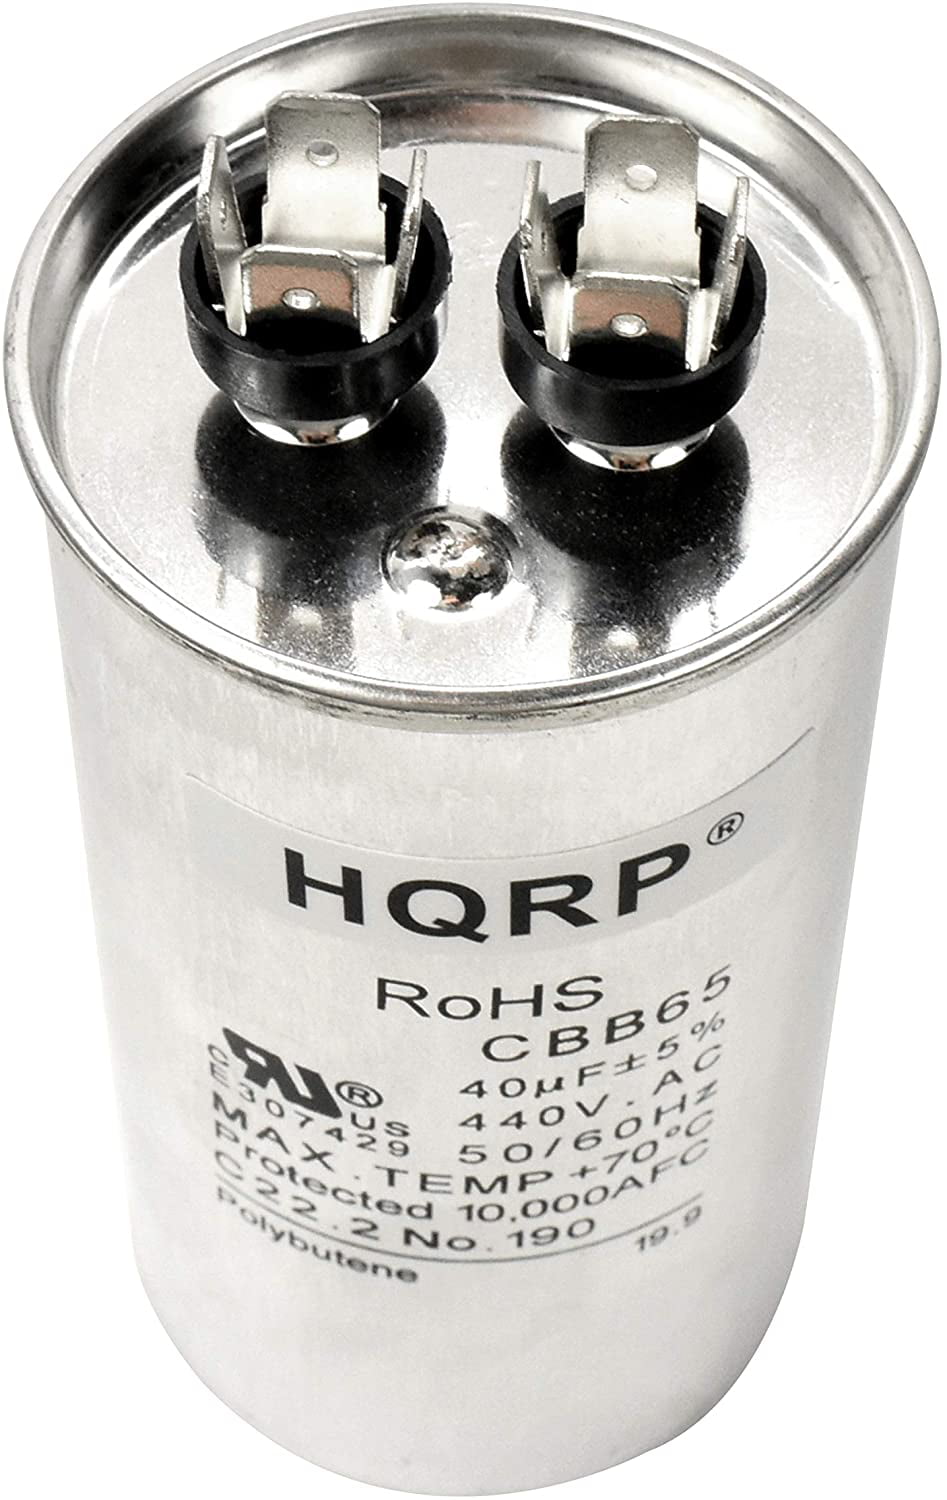 Details about   Run Capacitor 50x370v/440v for AC & Refrigeration Compressors & Motor New 